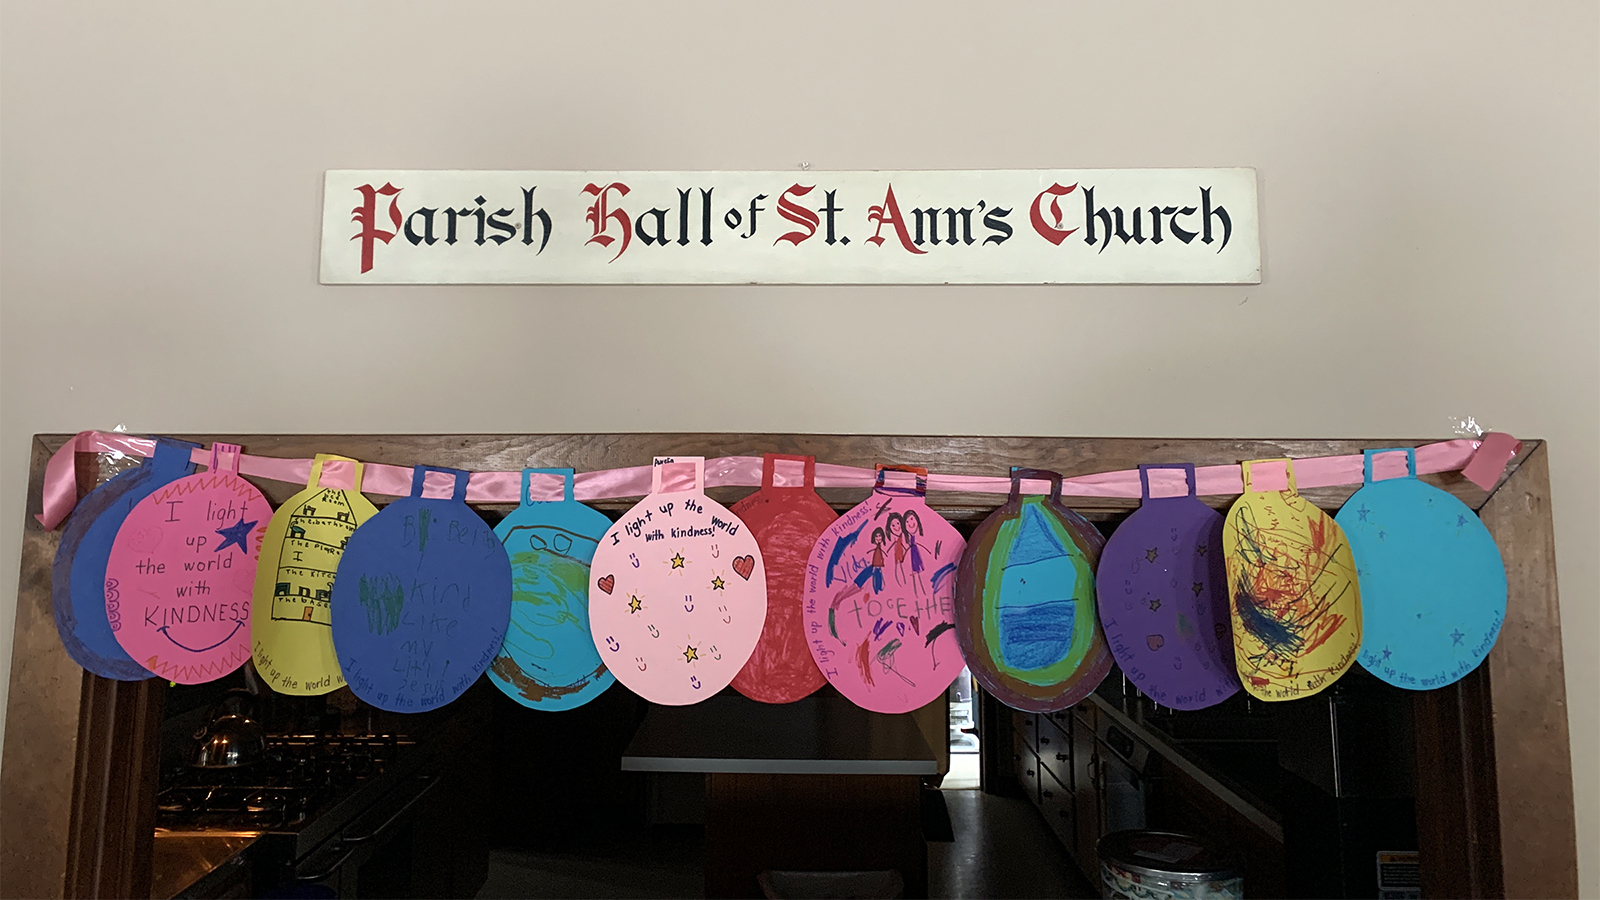 Crafts made by children in Sunday school classes decorate St. Ann’s Episcopal Church in Woodstock, Illinois. Photo courtesy of St. Ann's